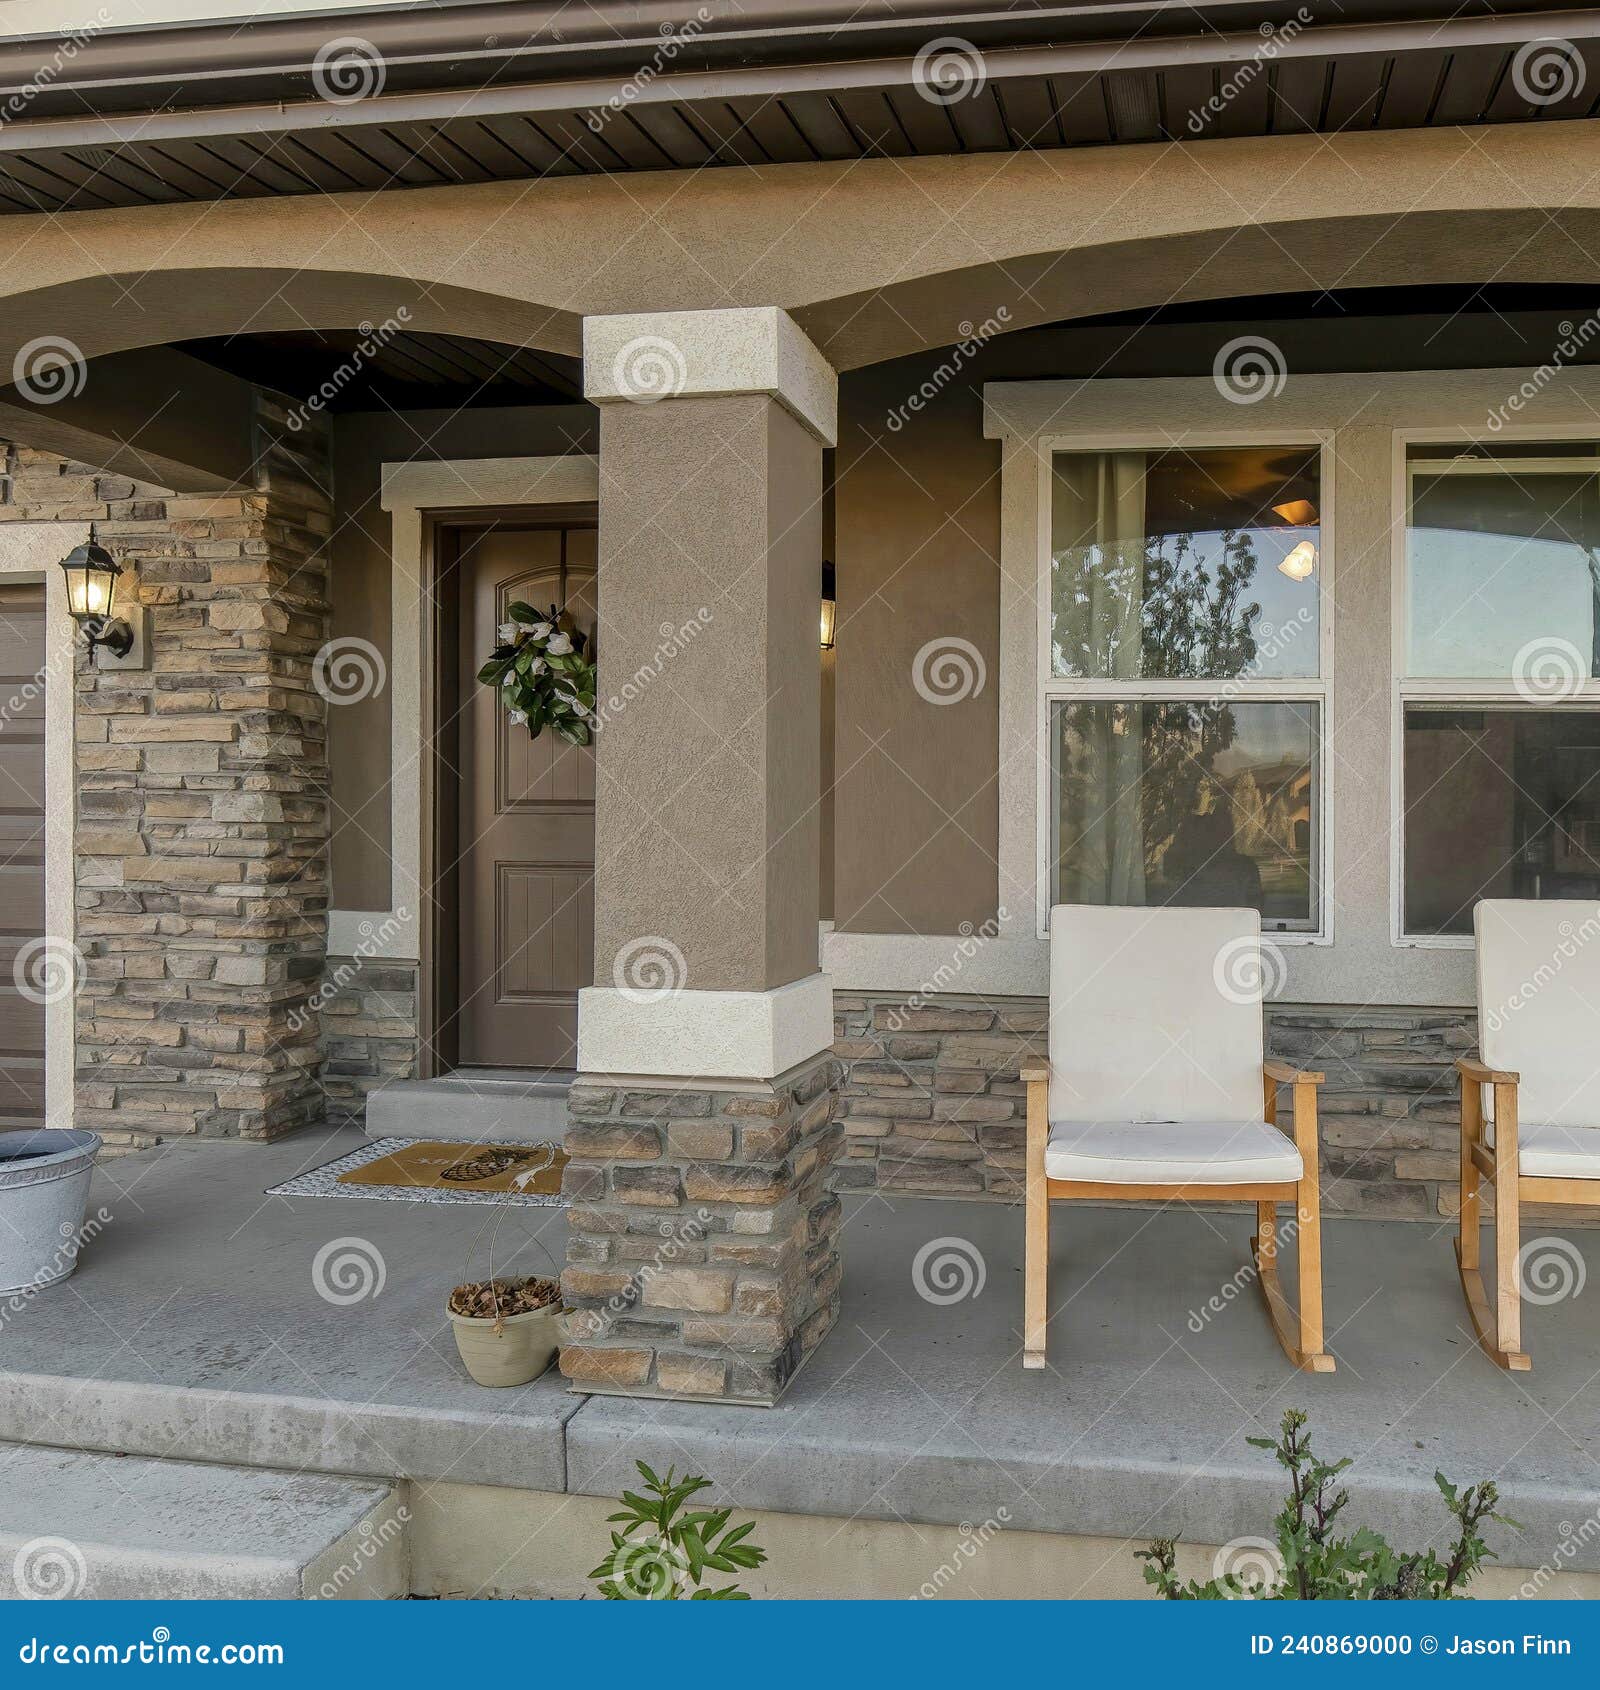 Square Exterior Of A House With Contemporary Design And A Front Yard Garden  Stock Photo - Image Of Board, Wood: 240869000